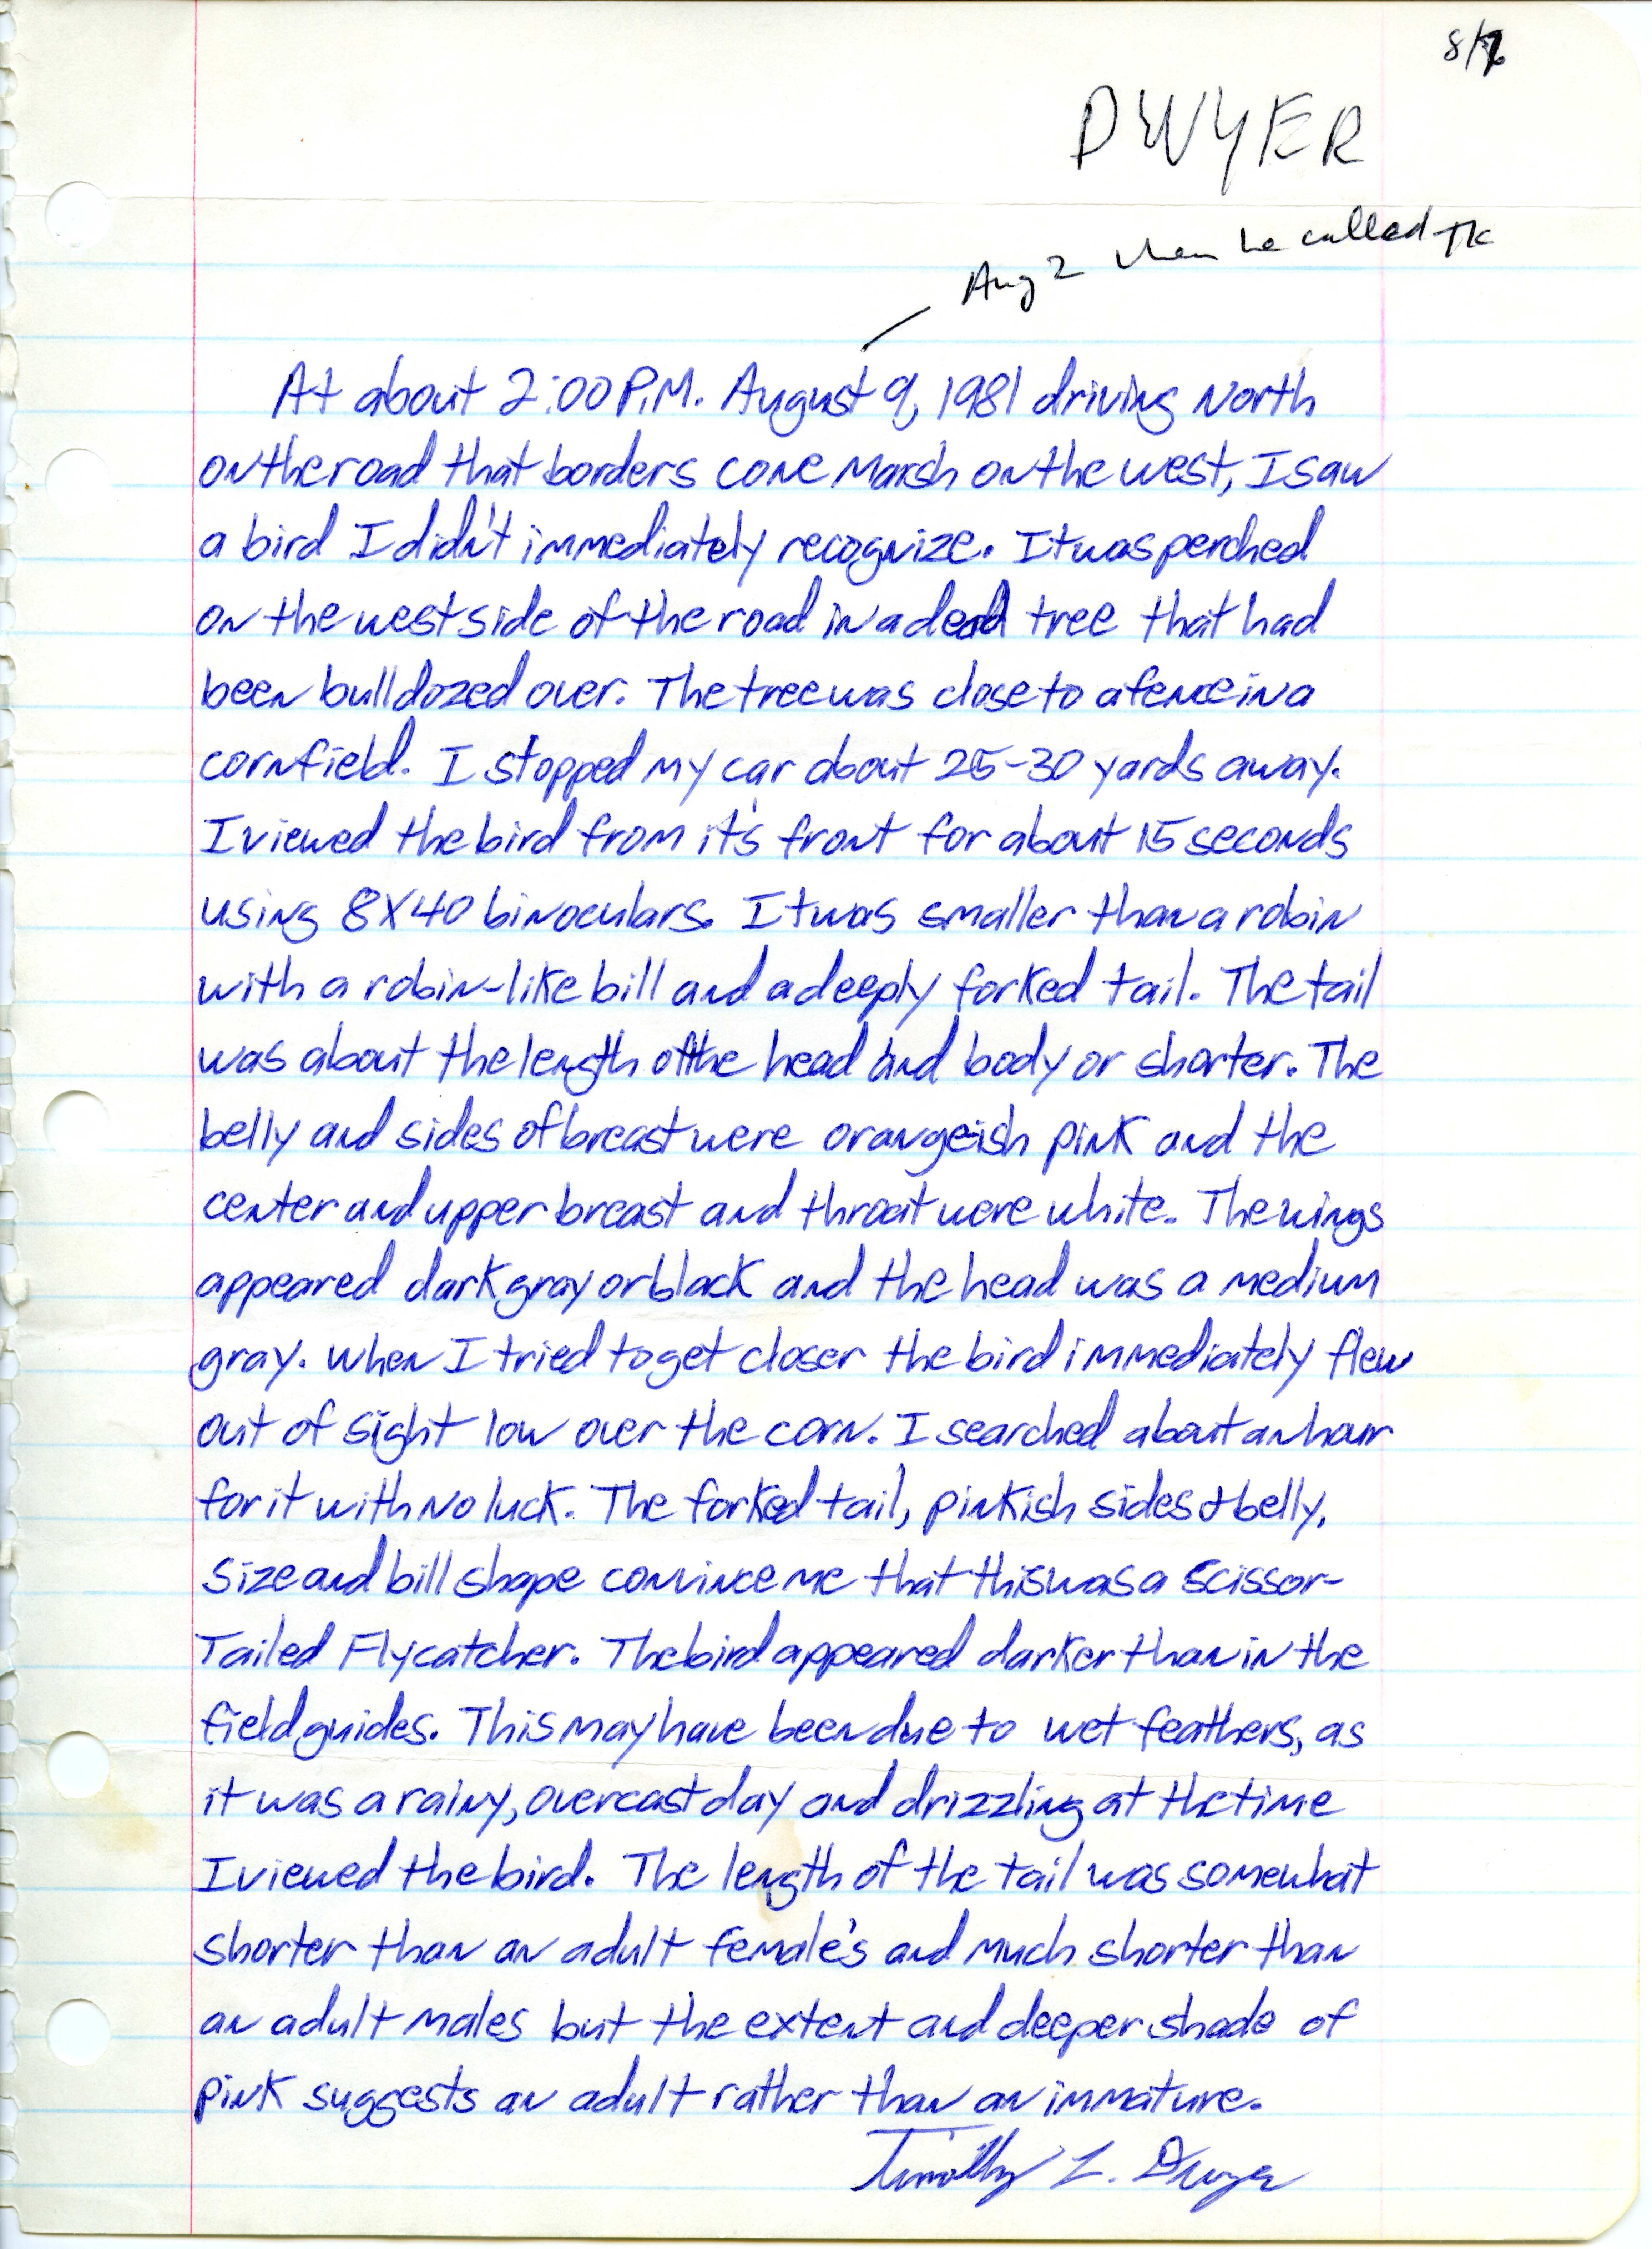 Field note contributed by Timothy L. Dwyer, August 2, 1981